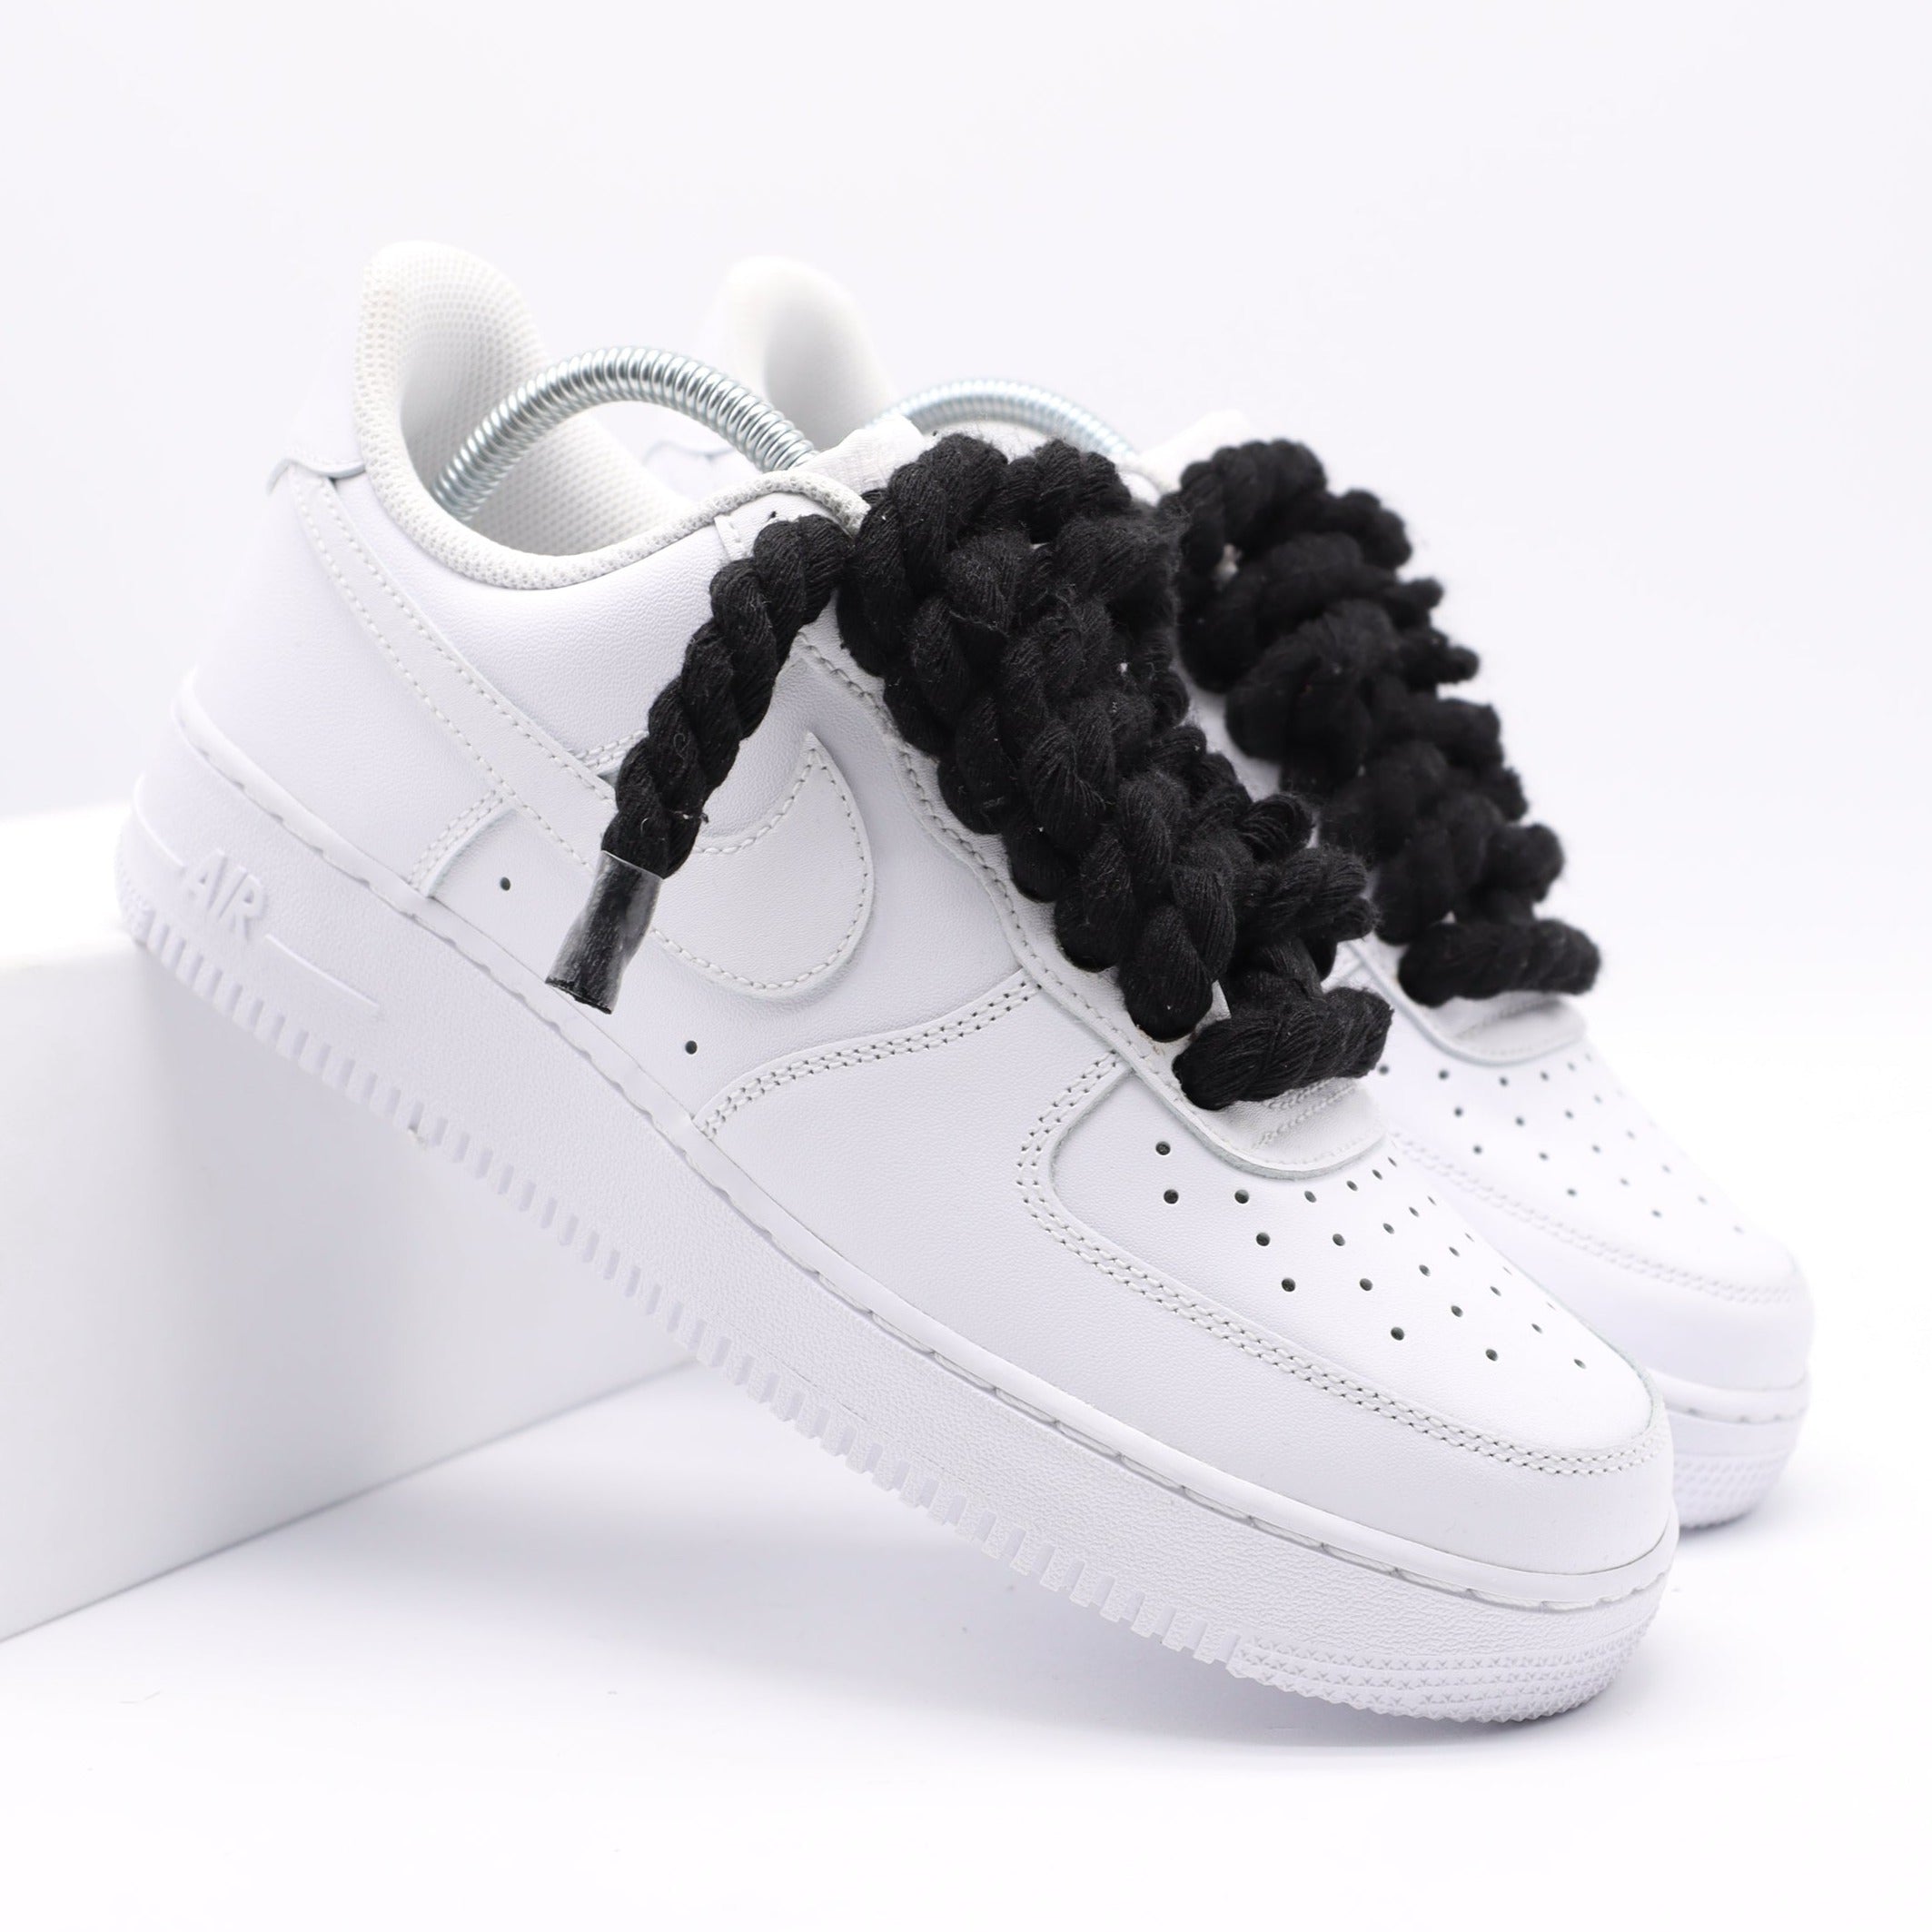 Black Air Force 1 Rope Laces 